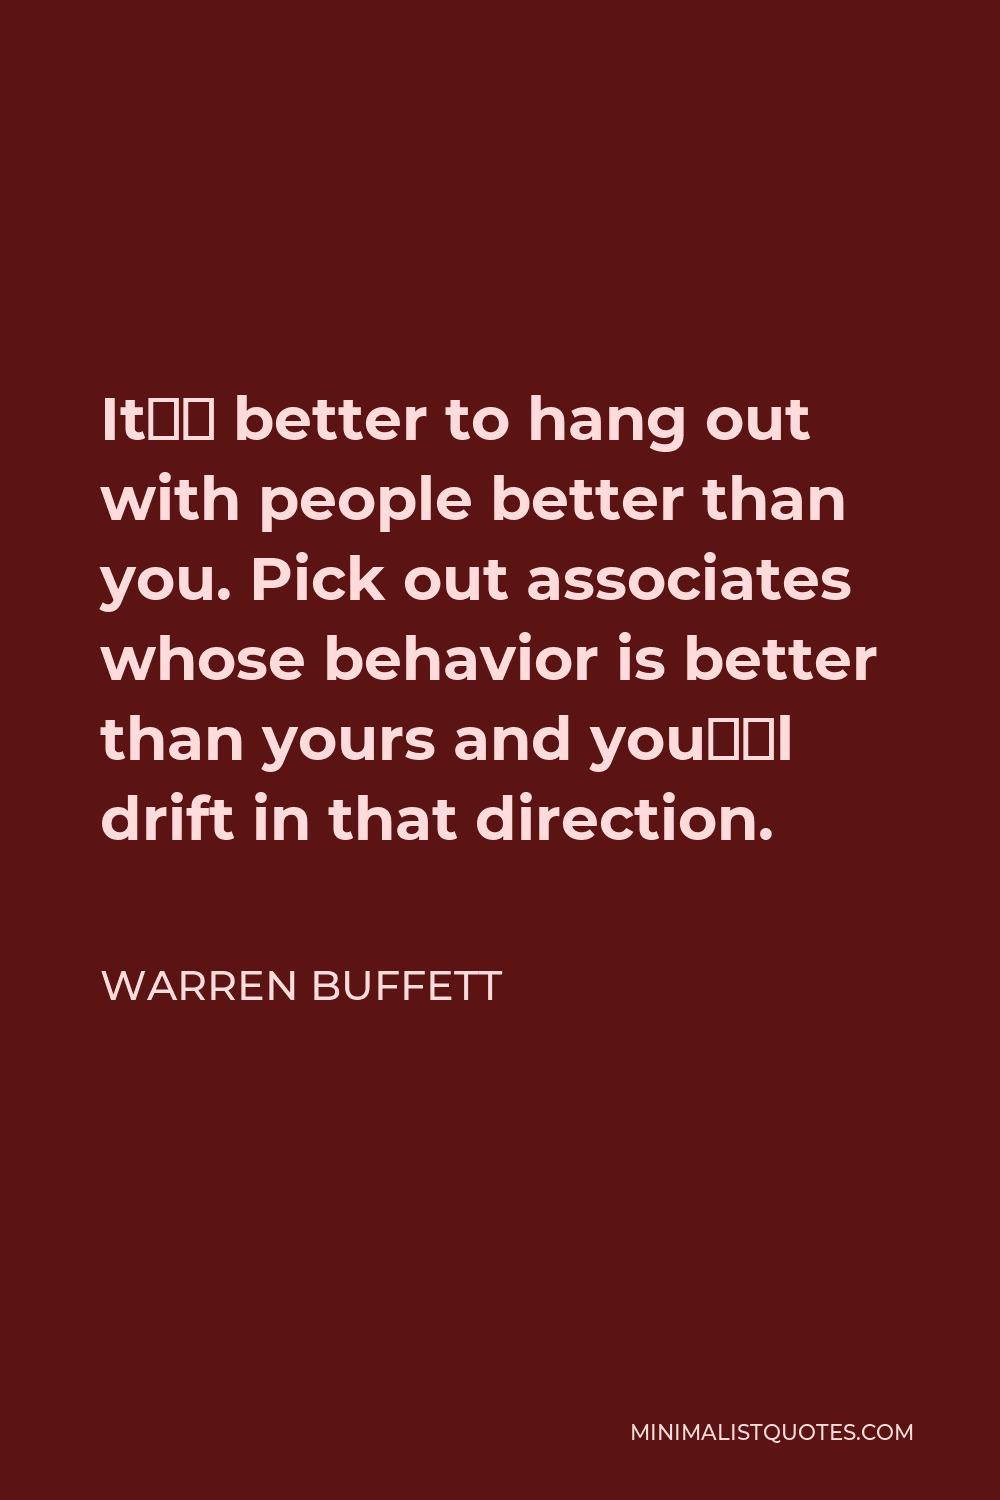 Warren Buffett Quote - It’s better to hang out with people better than you. Pick out associates whose behavior is better than yours and you’ll drift in that direction.